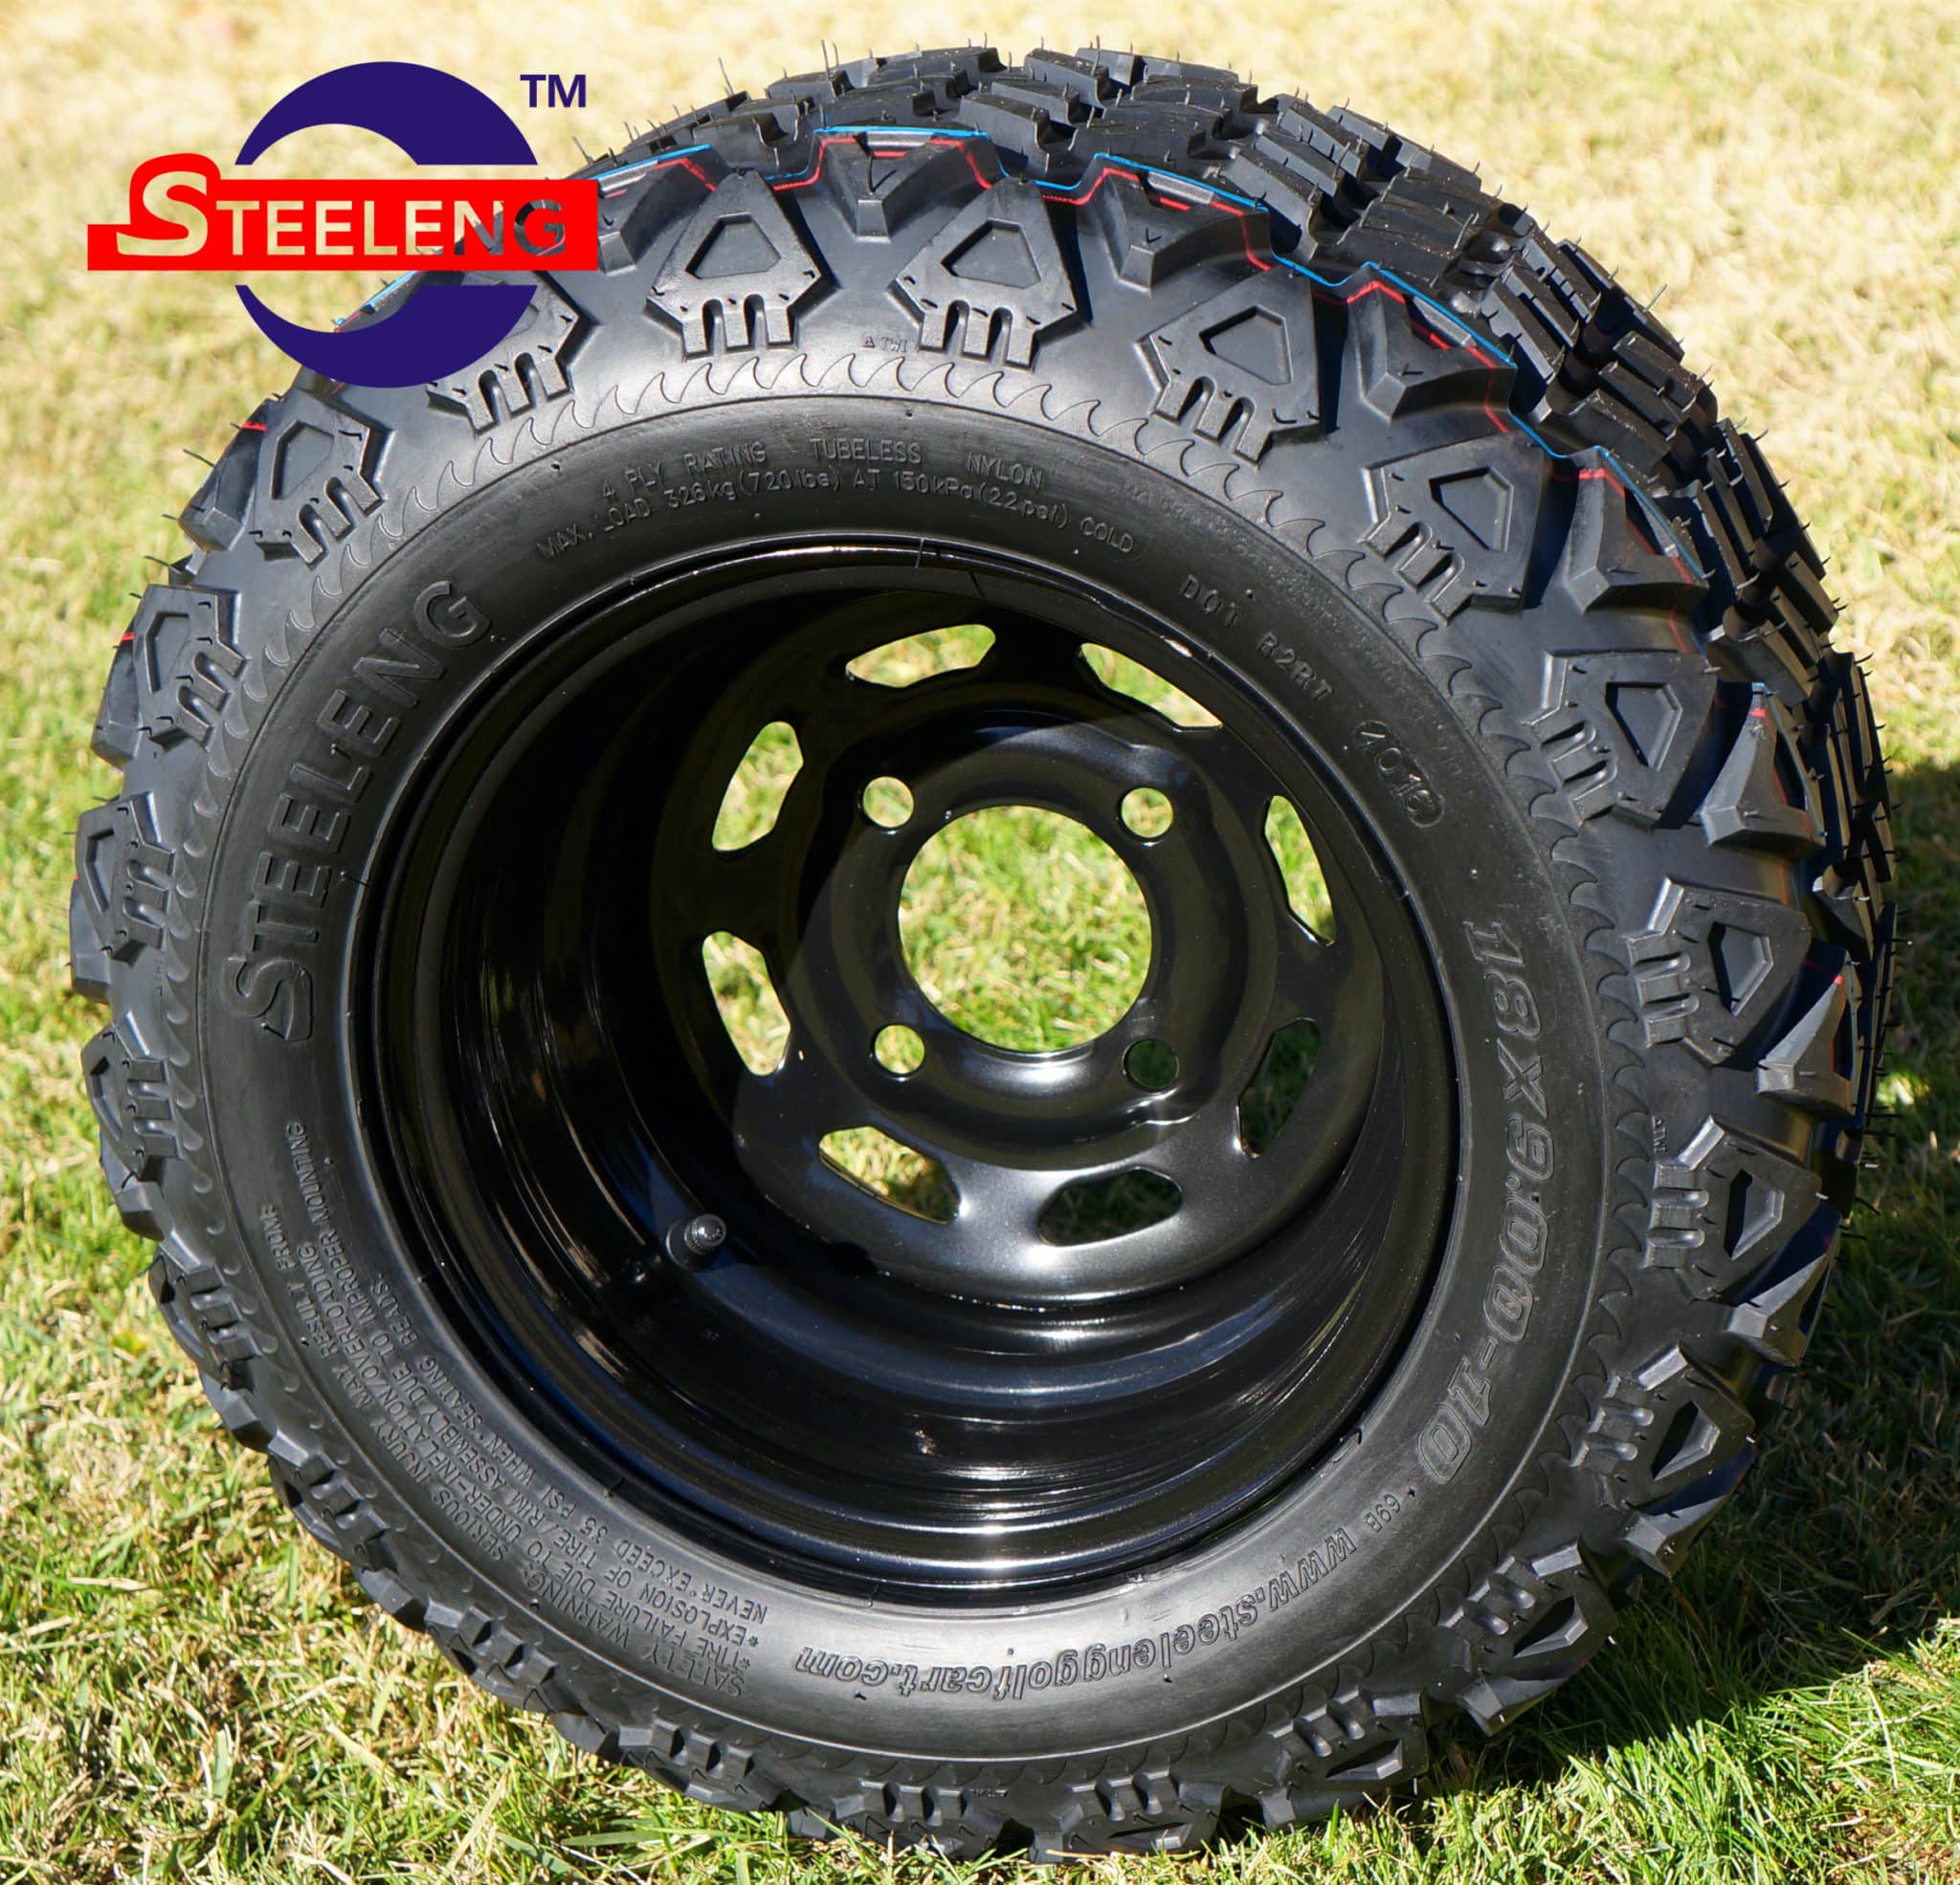 10" Black Slotted Steel Wheel & 18" x 9" -10" All Terrain Tire DOT Approved